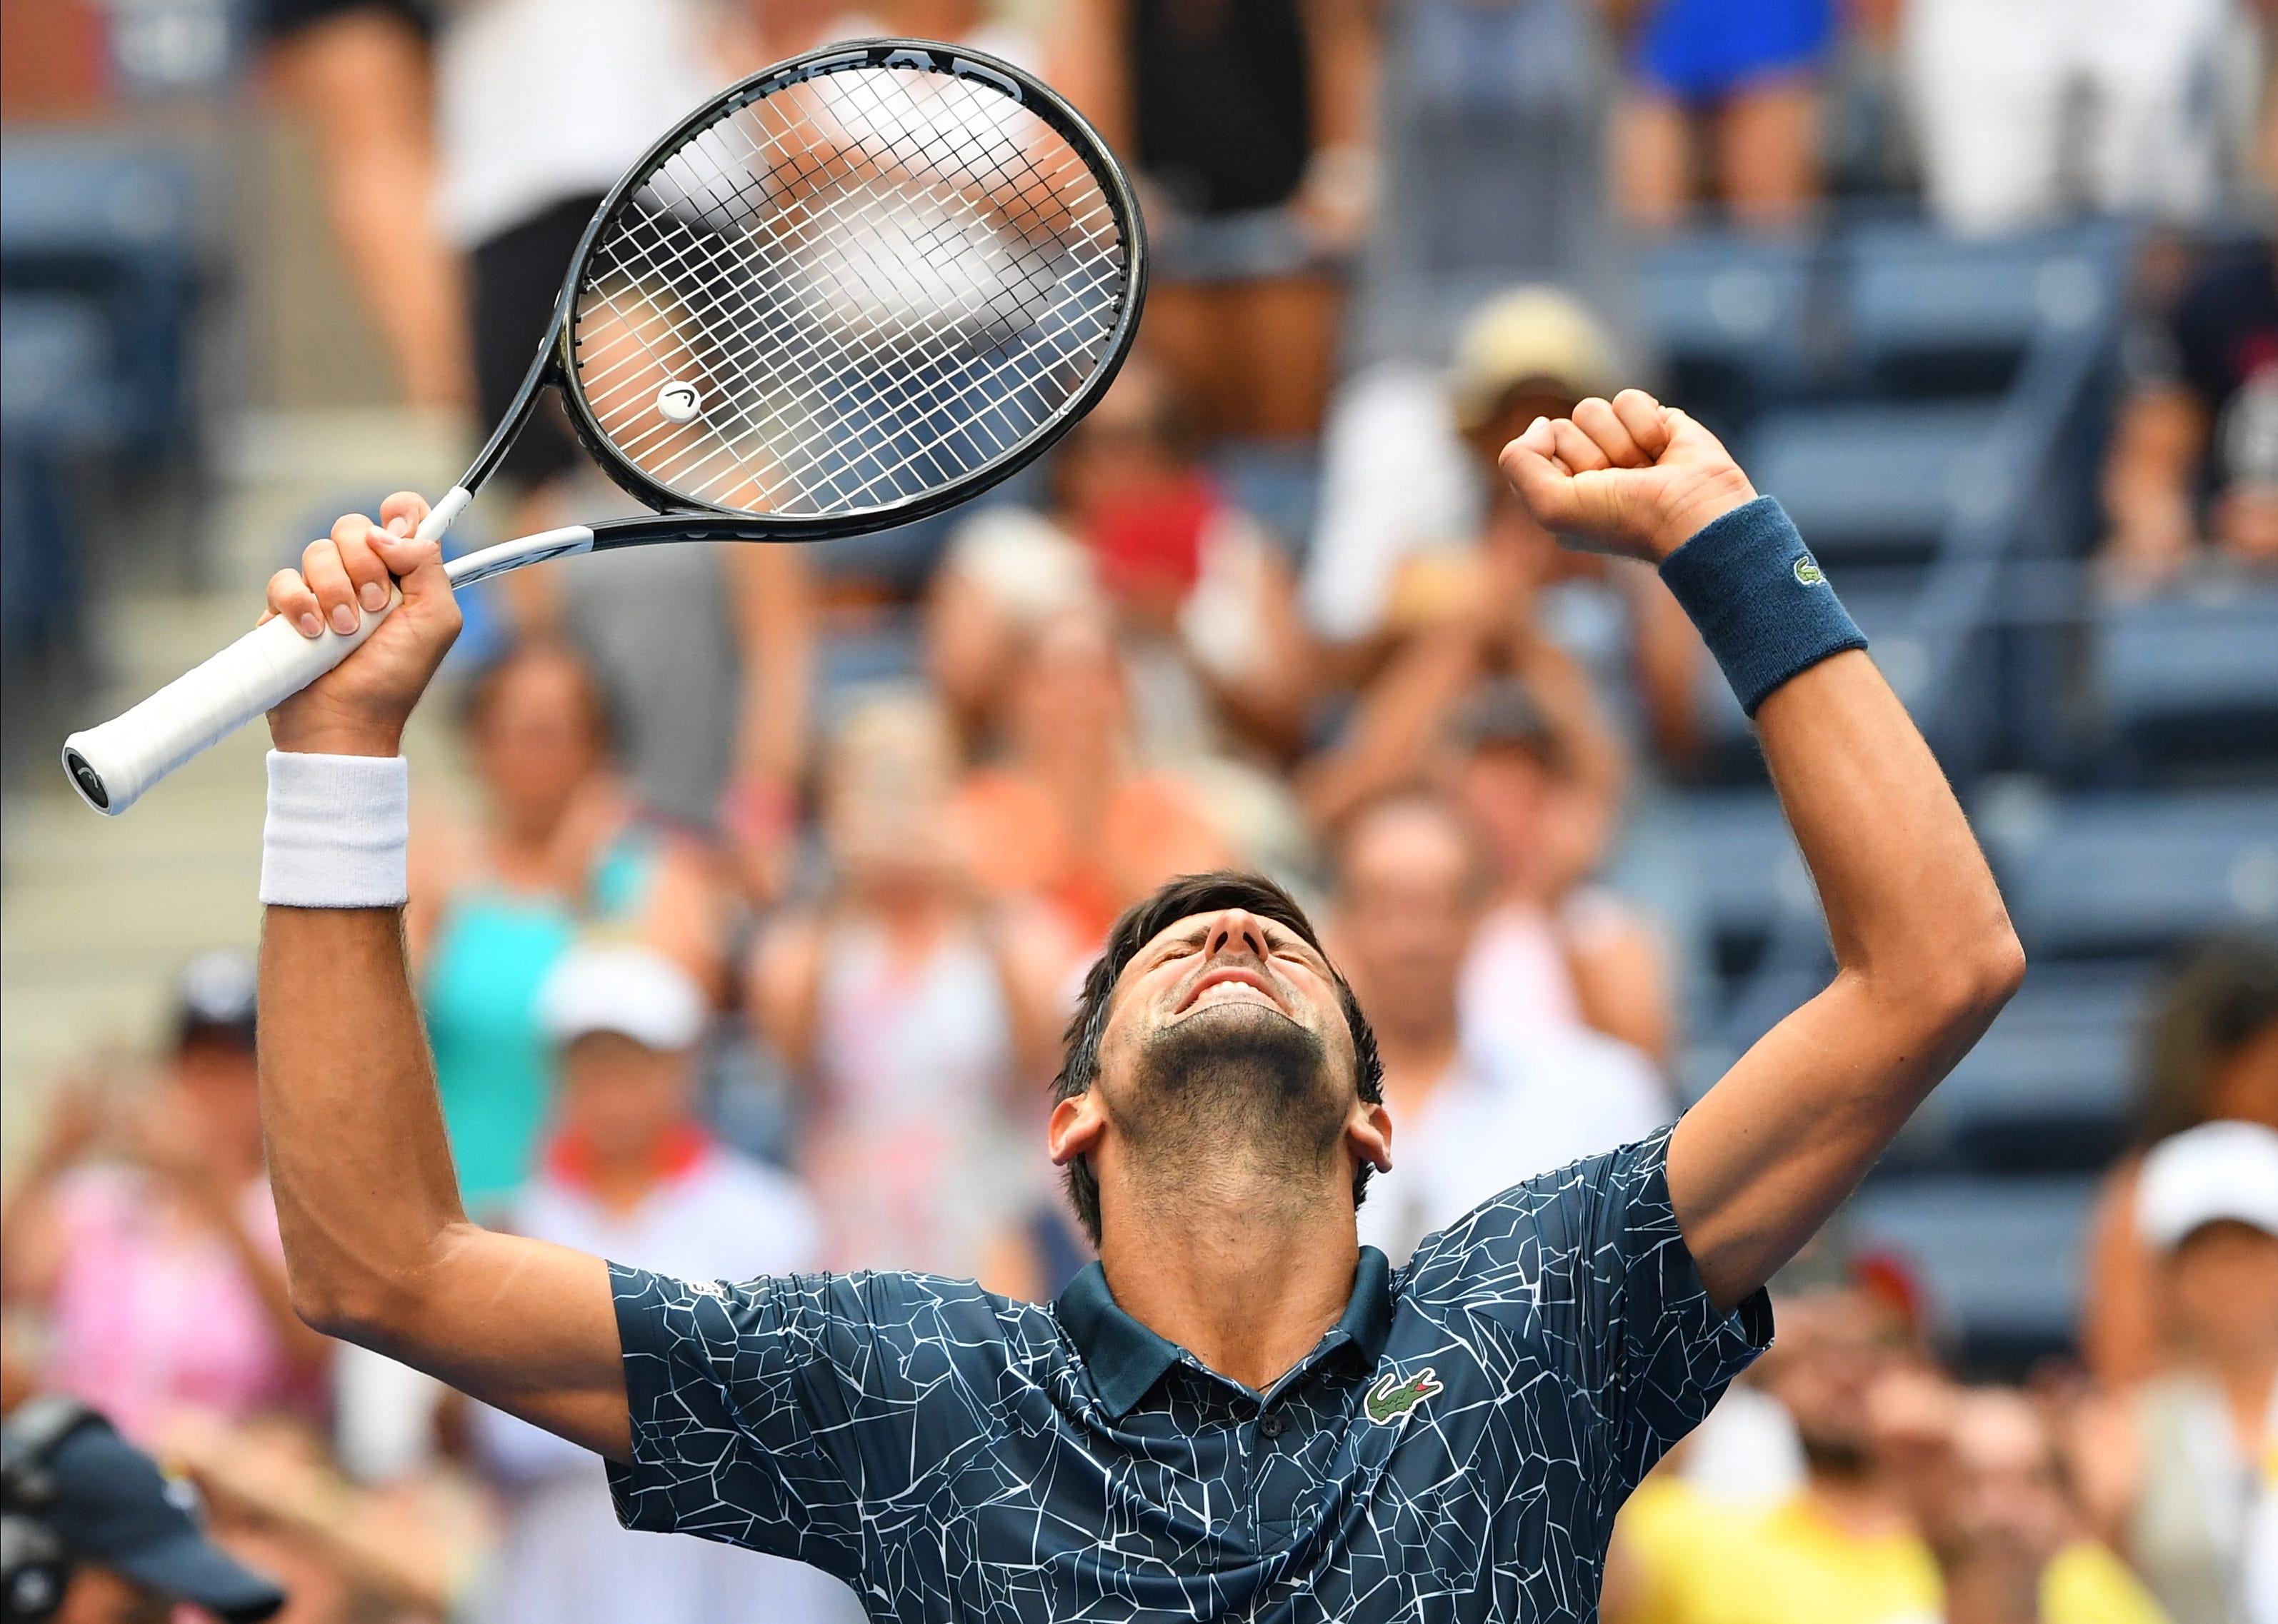 Novak Djokovic of Serbia after beating Marton Fucsovics of Hungary in a first round match on day two of the 2018 U.S. Open tennis tournament at USTA Billie Jean King National Tennis Center in New York.